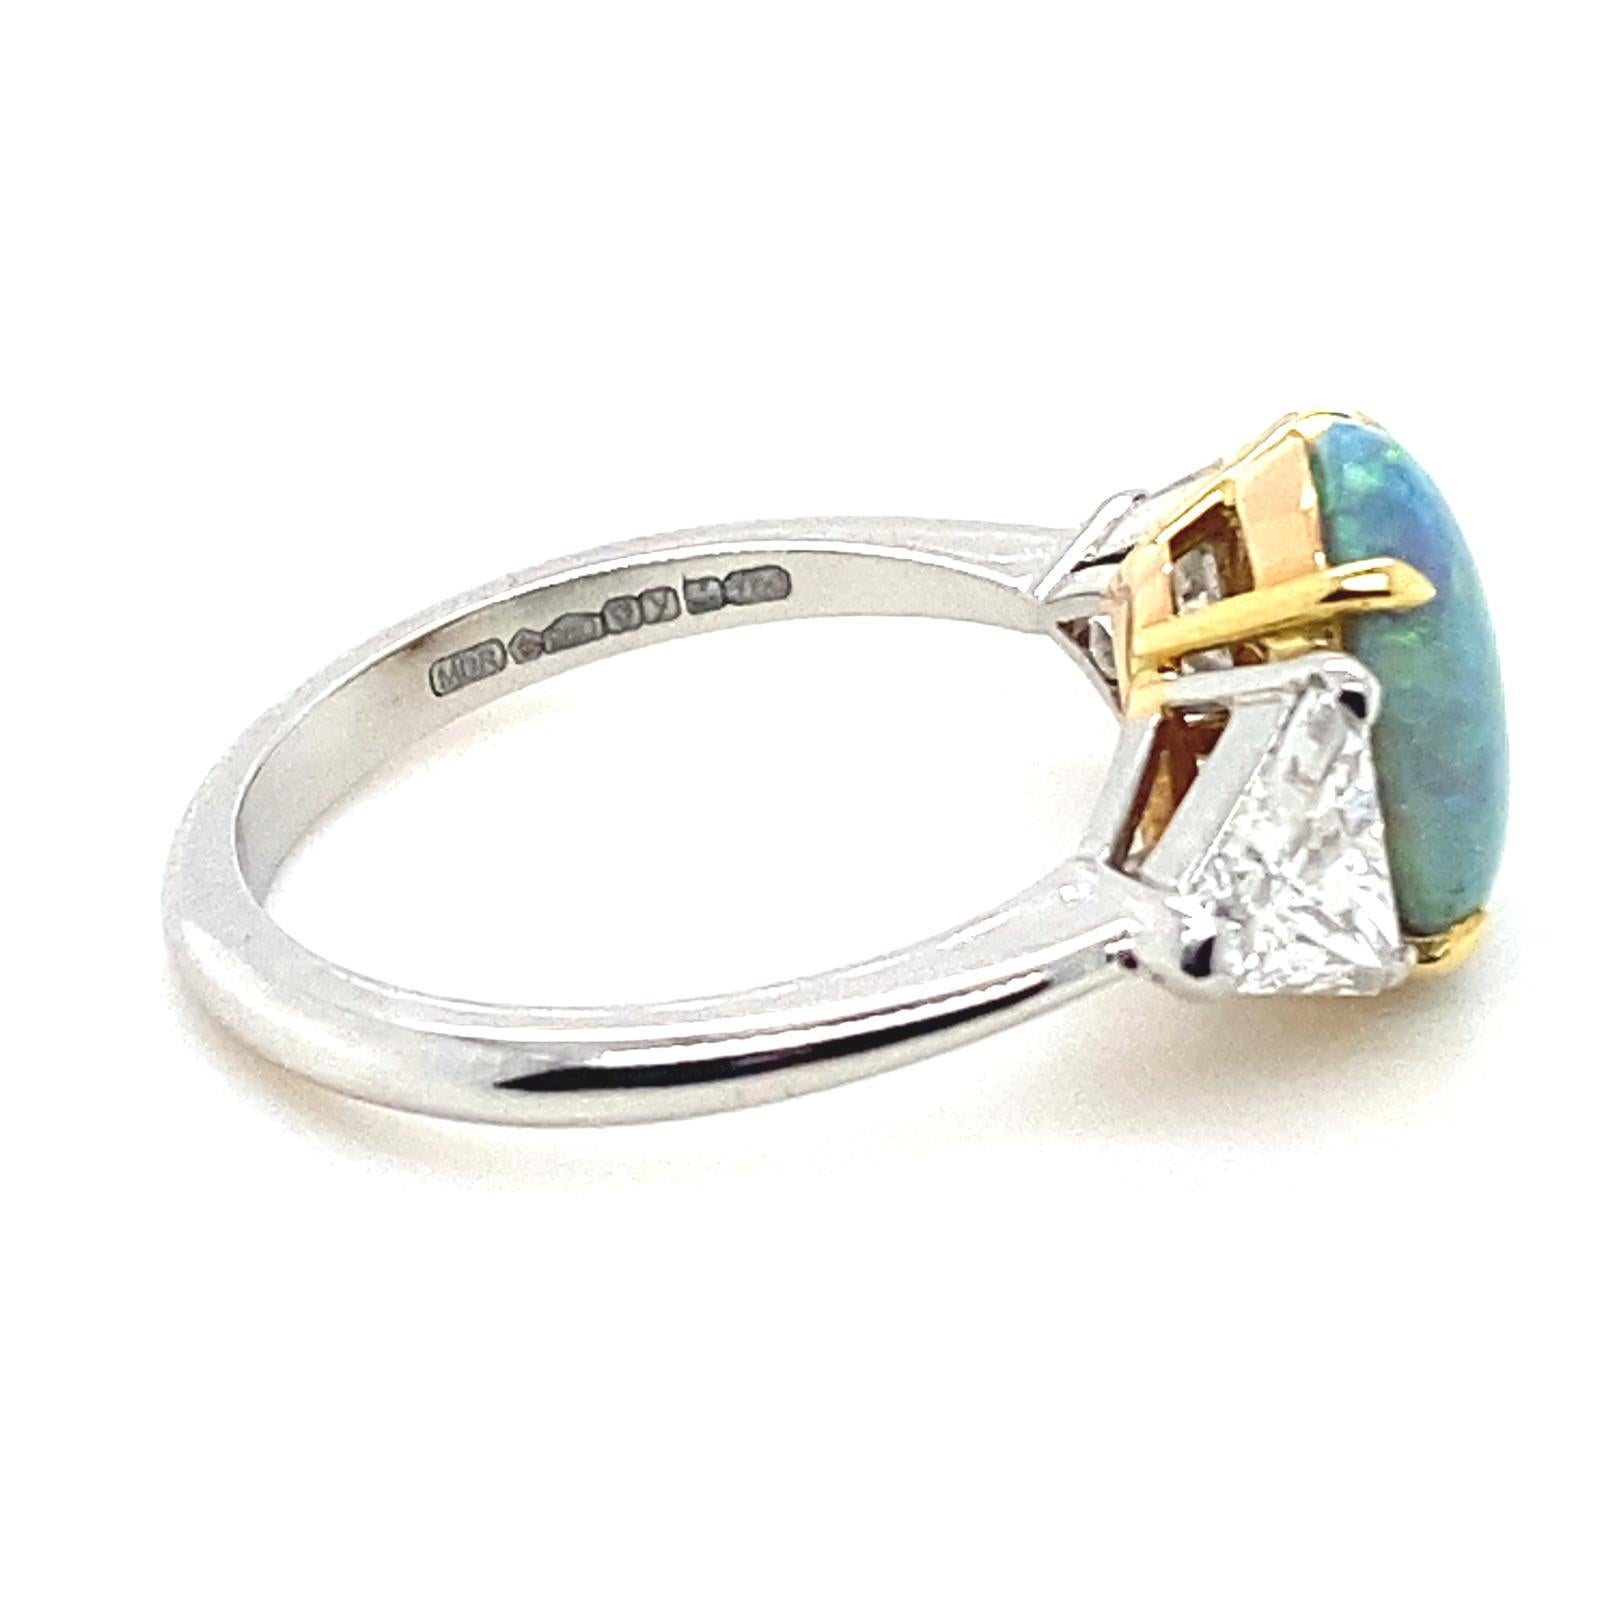 An opal and diamond platinum ring

This beautiful opal and diamond ring is handcrafted in platinum. The piece is set to its centre in contrasting yellow gold claws with a round cabochon cut opal of 1.93cts.
 
The opal is framed on either side with a